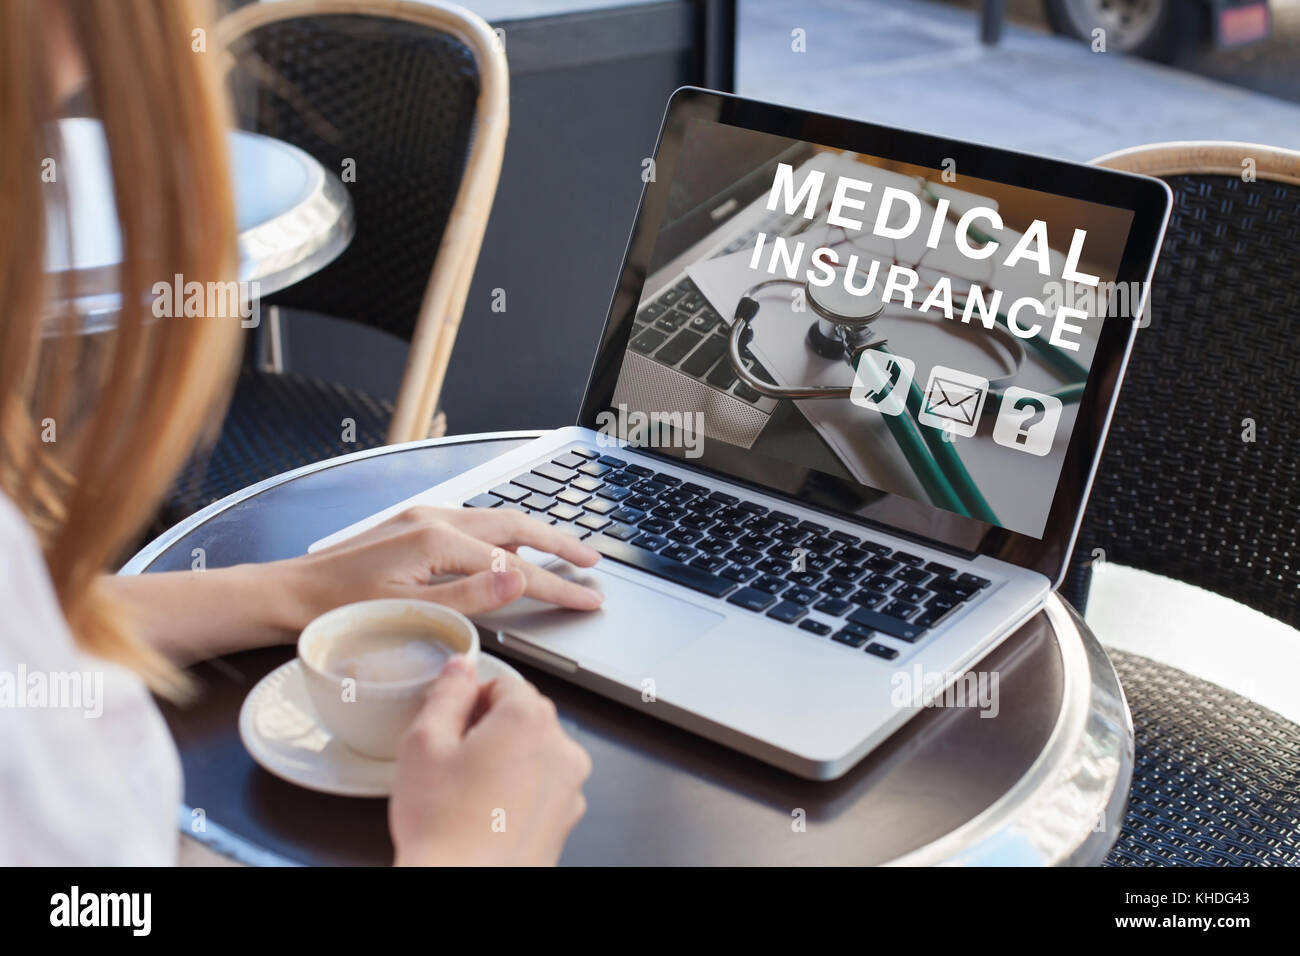 medical insurance concept Stock Photo